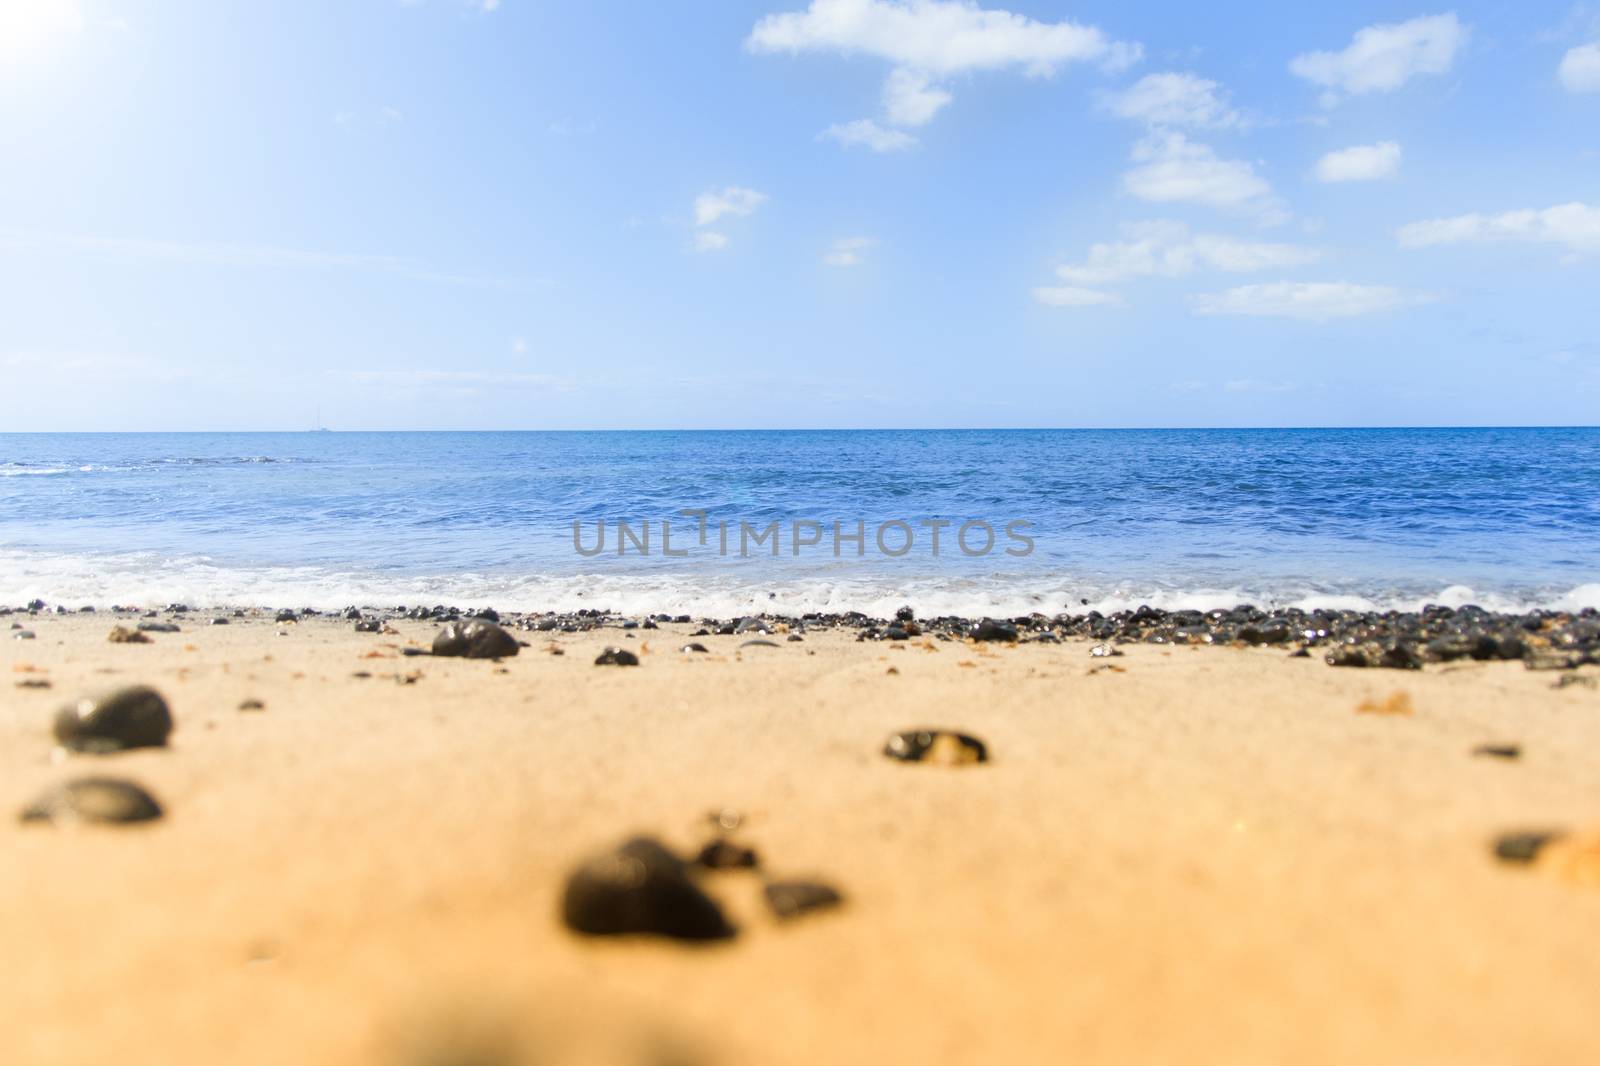 waves and blue waters. Beach with black stones and the sun.